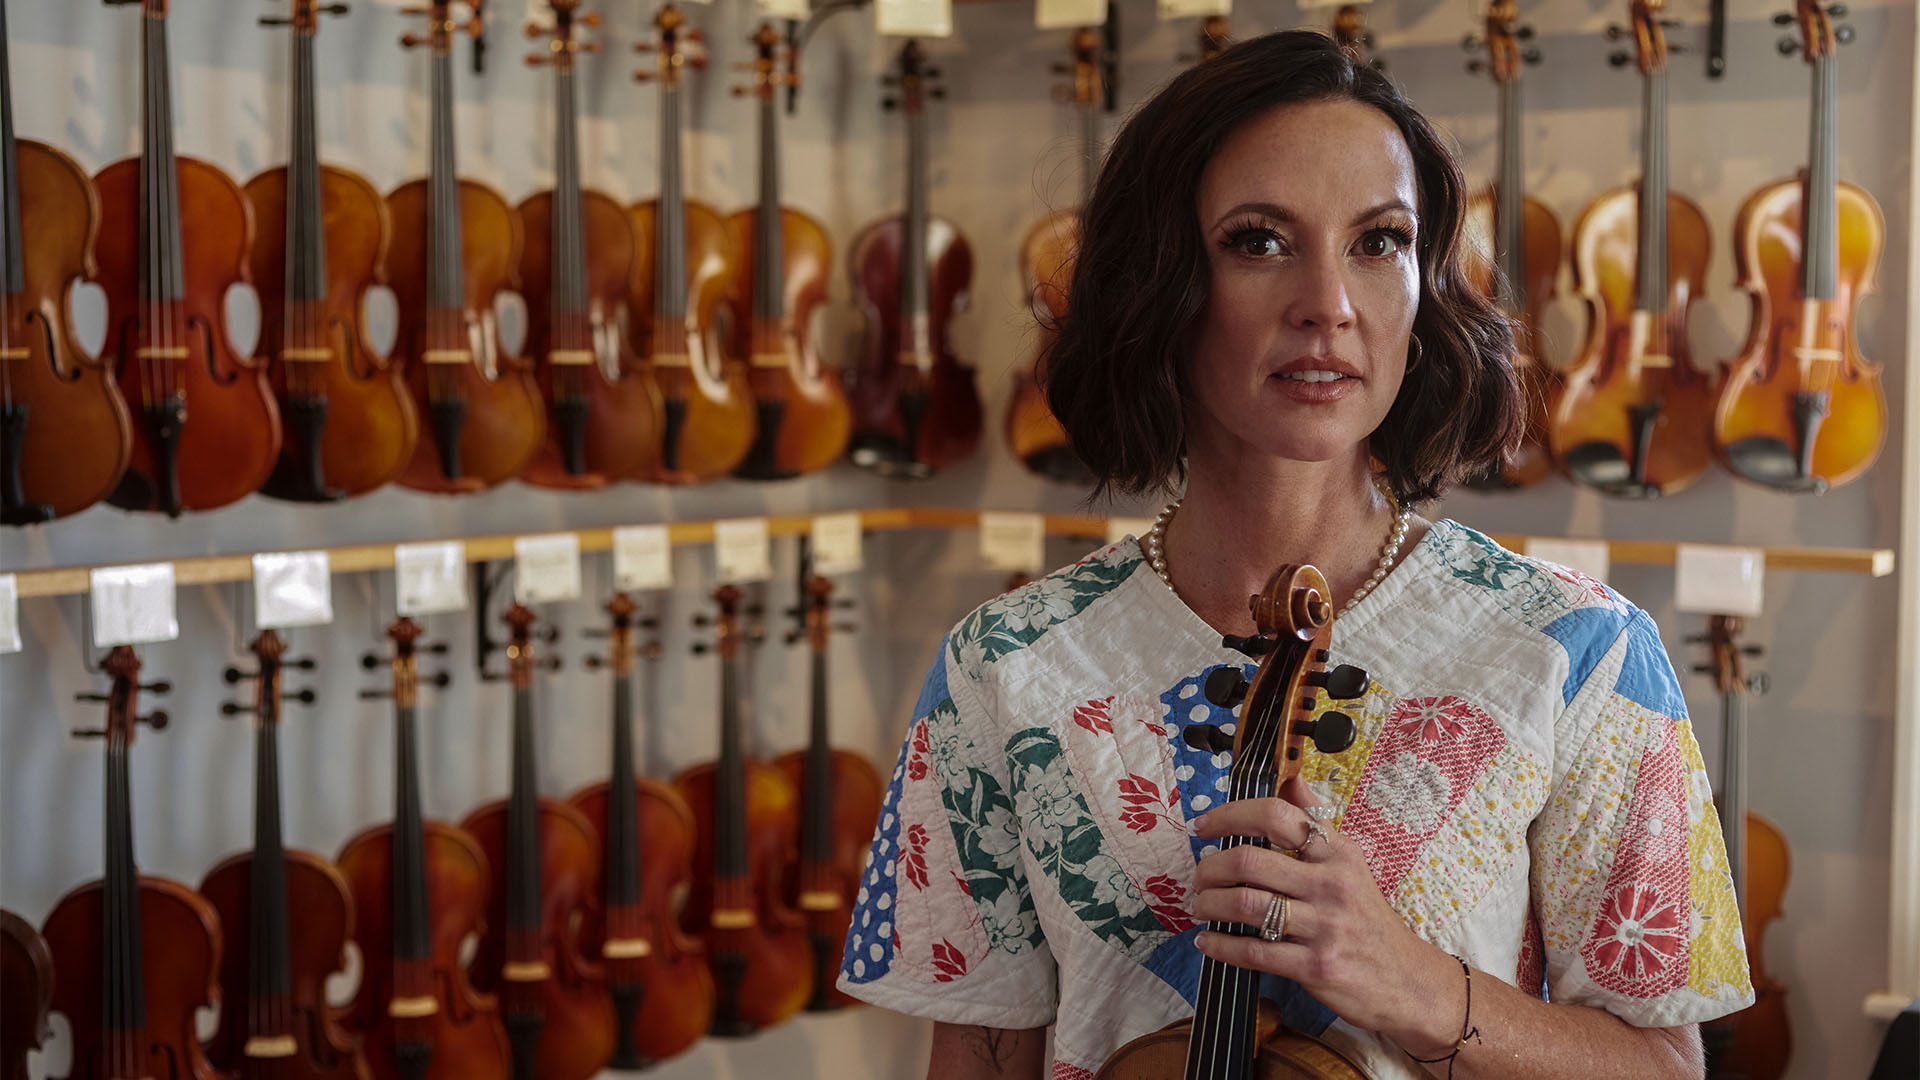 Amanda Shires with a fiddle at The Violin Shop in Nashville, Tennessee.